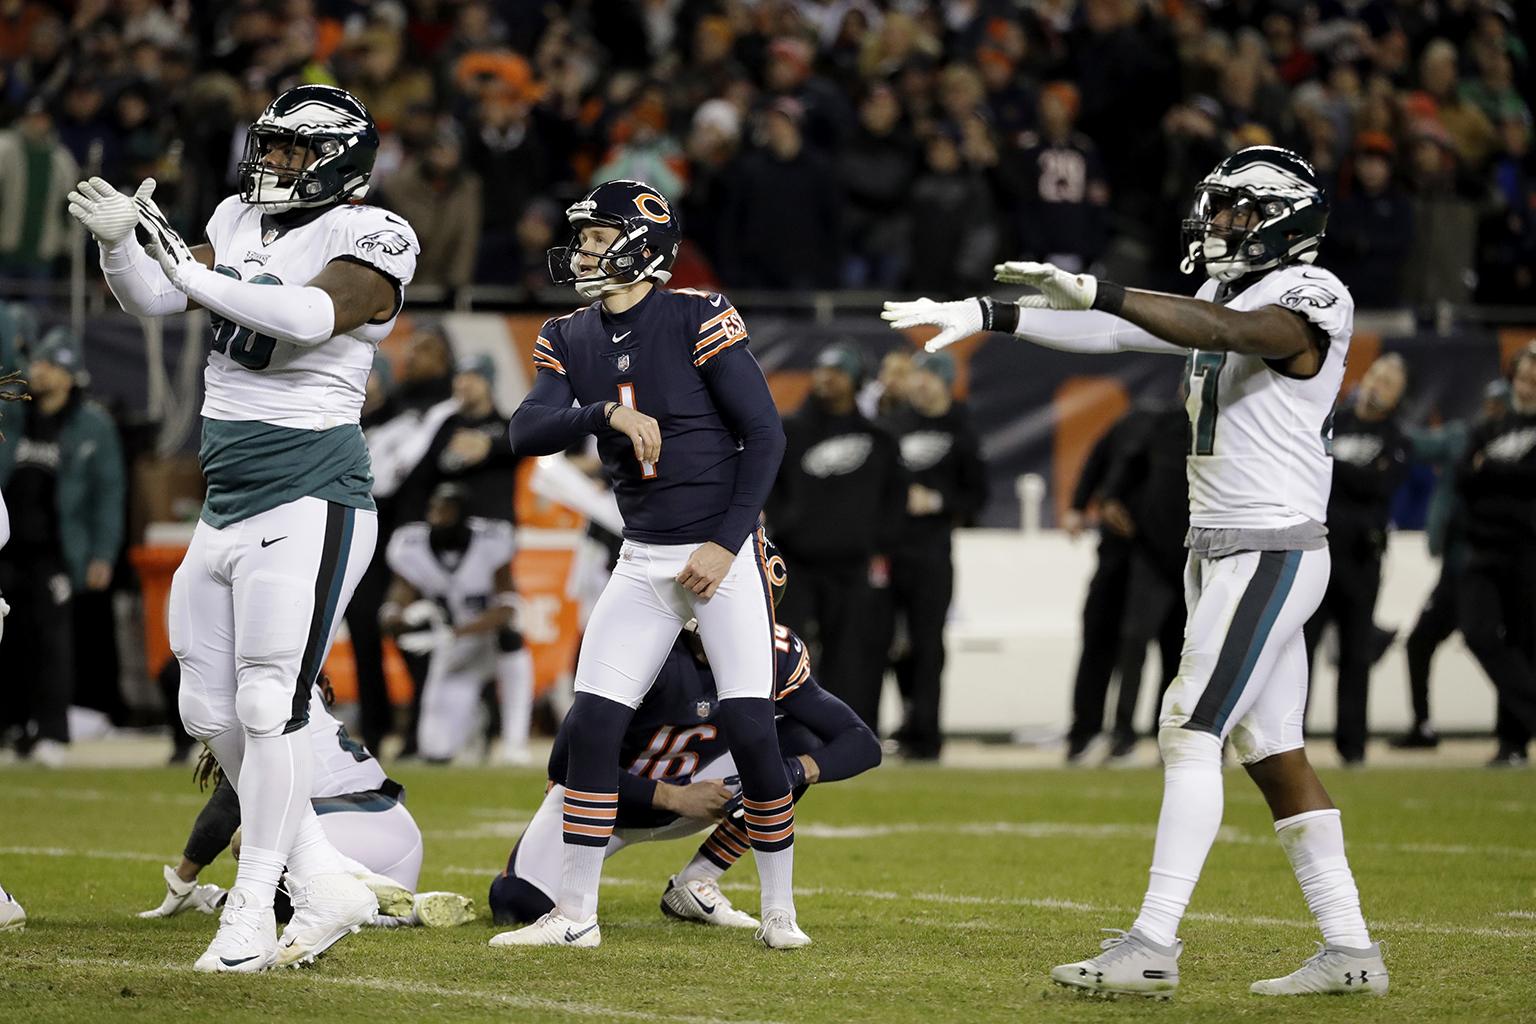 Chicago Bears kicker Cody Parkey (1) watches as he misses a field goal in the final minute during the second half of an NFL wild-card playoff football game against the Philadelphia Eagles Sunday, Jan. 6, 2019. (AP Photo / Nam Y. Huh)